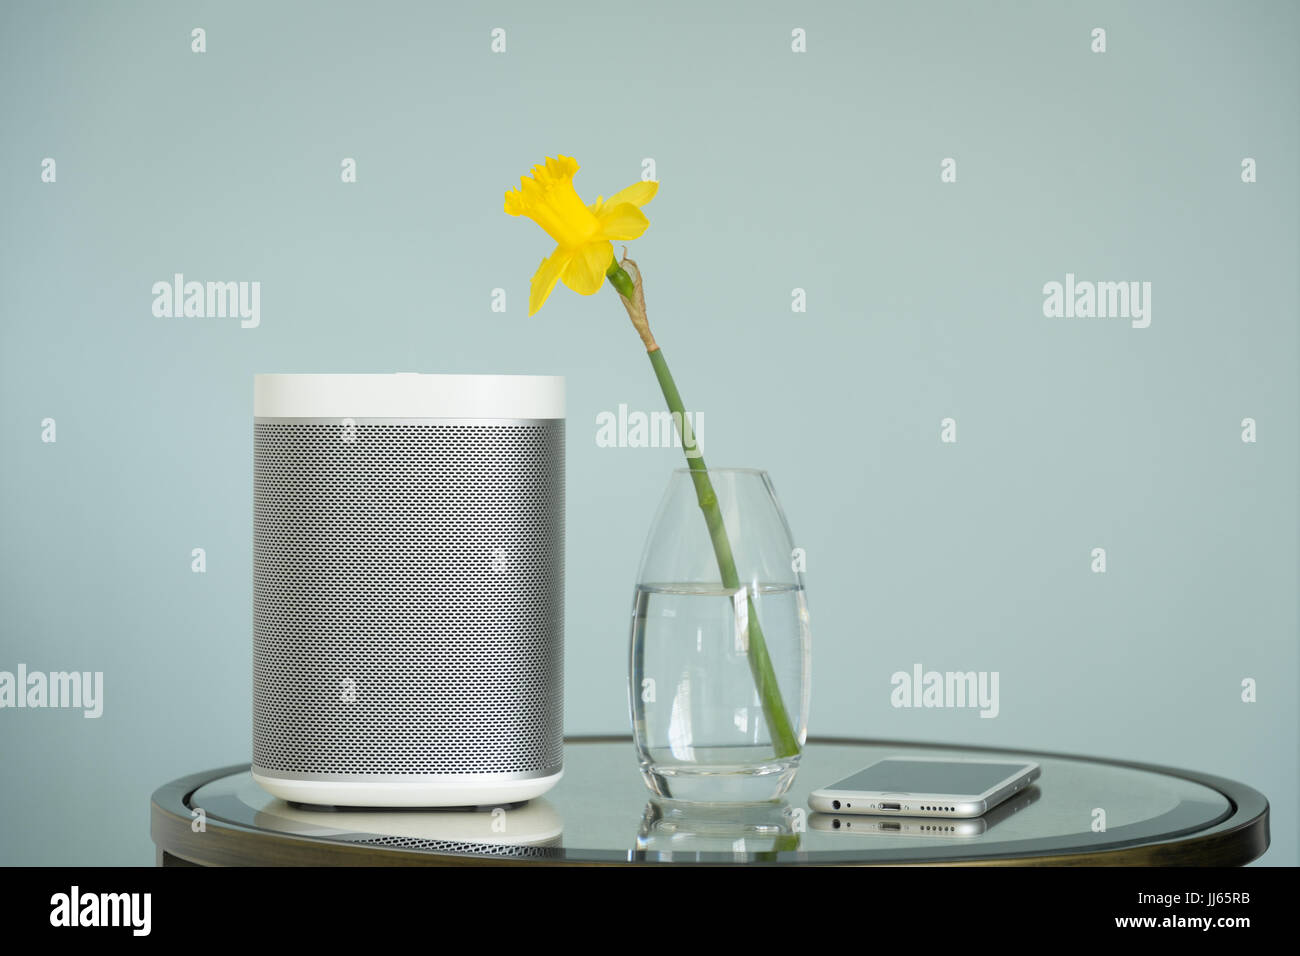 Wireless speaker and mobile phone on a mirrored table with a yellow daffodil. Stock Photo